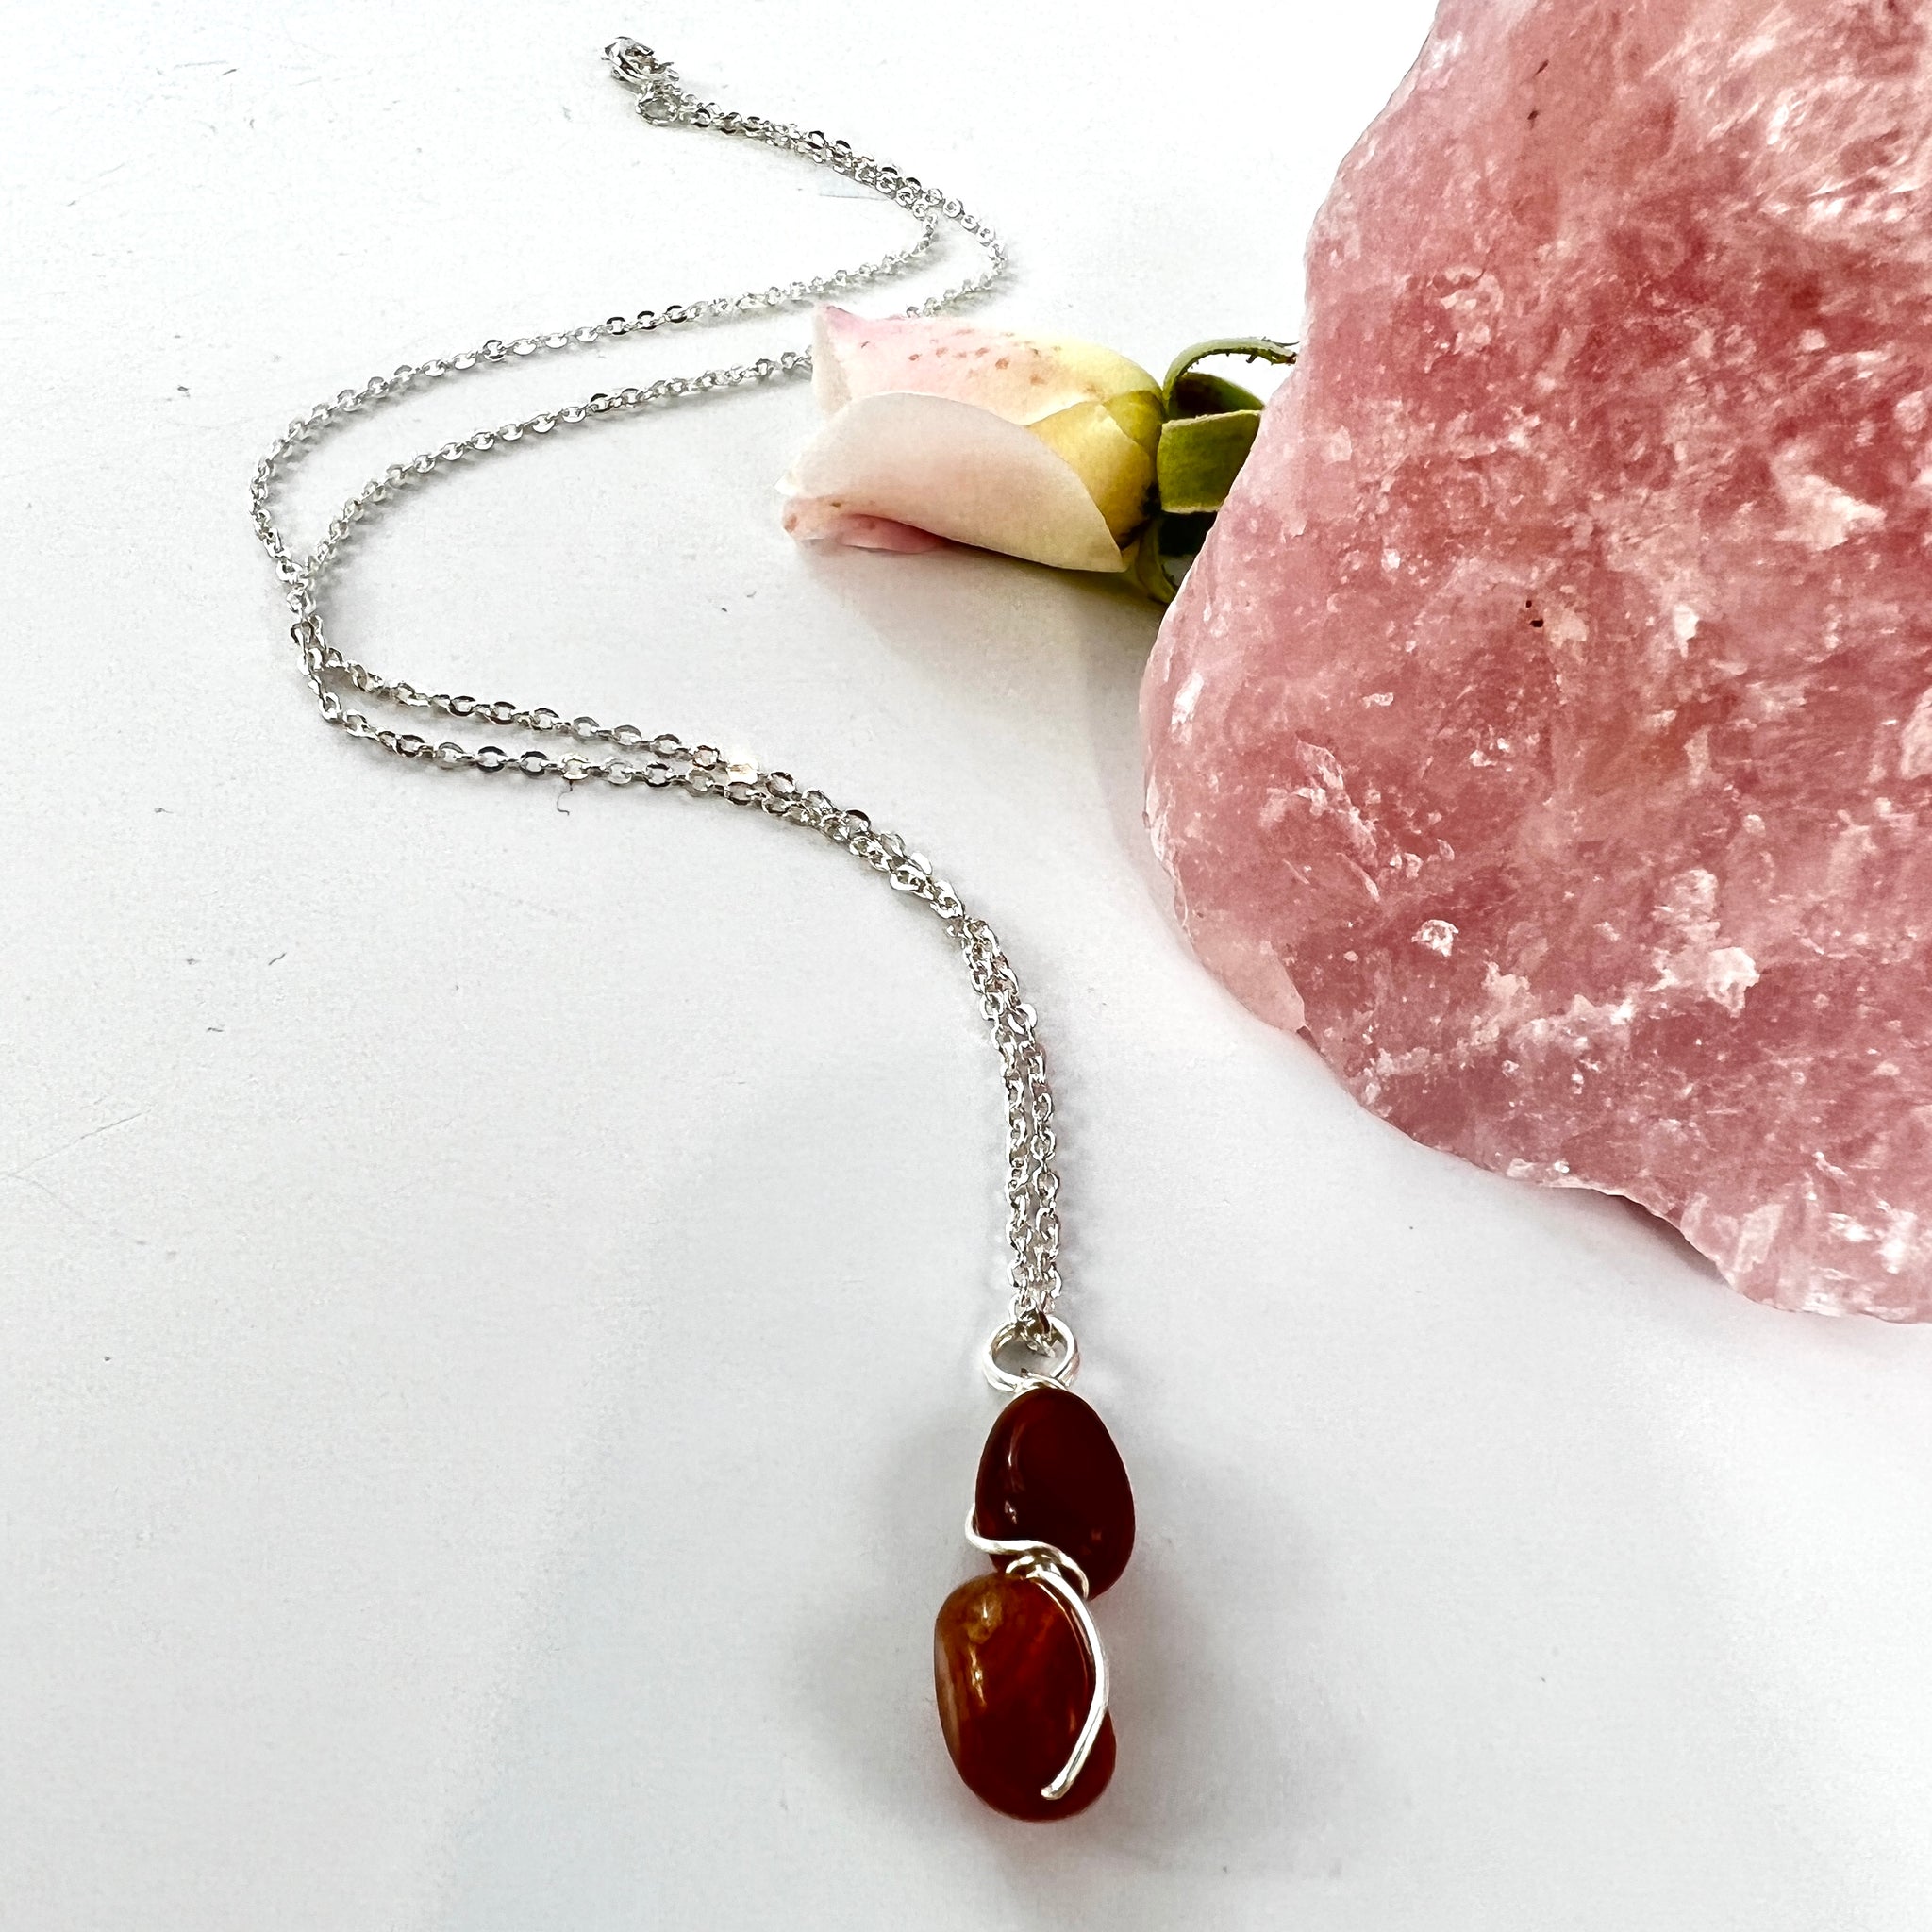 Carnelian Crystal Necklace - Red Heart Pendant for Women and Girls -  Healing Cry | eBay